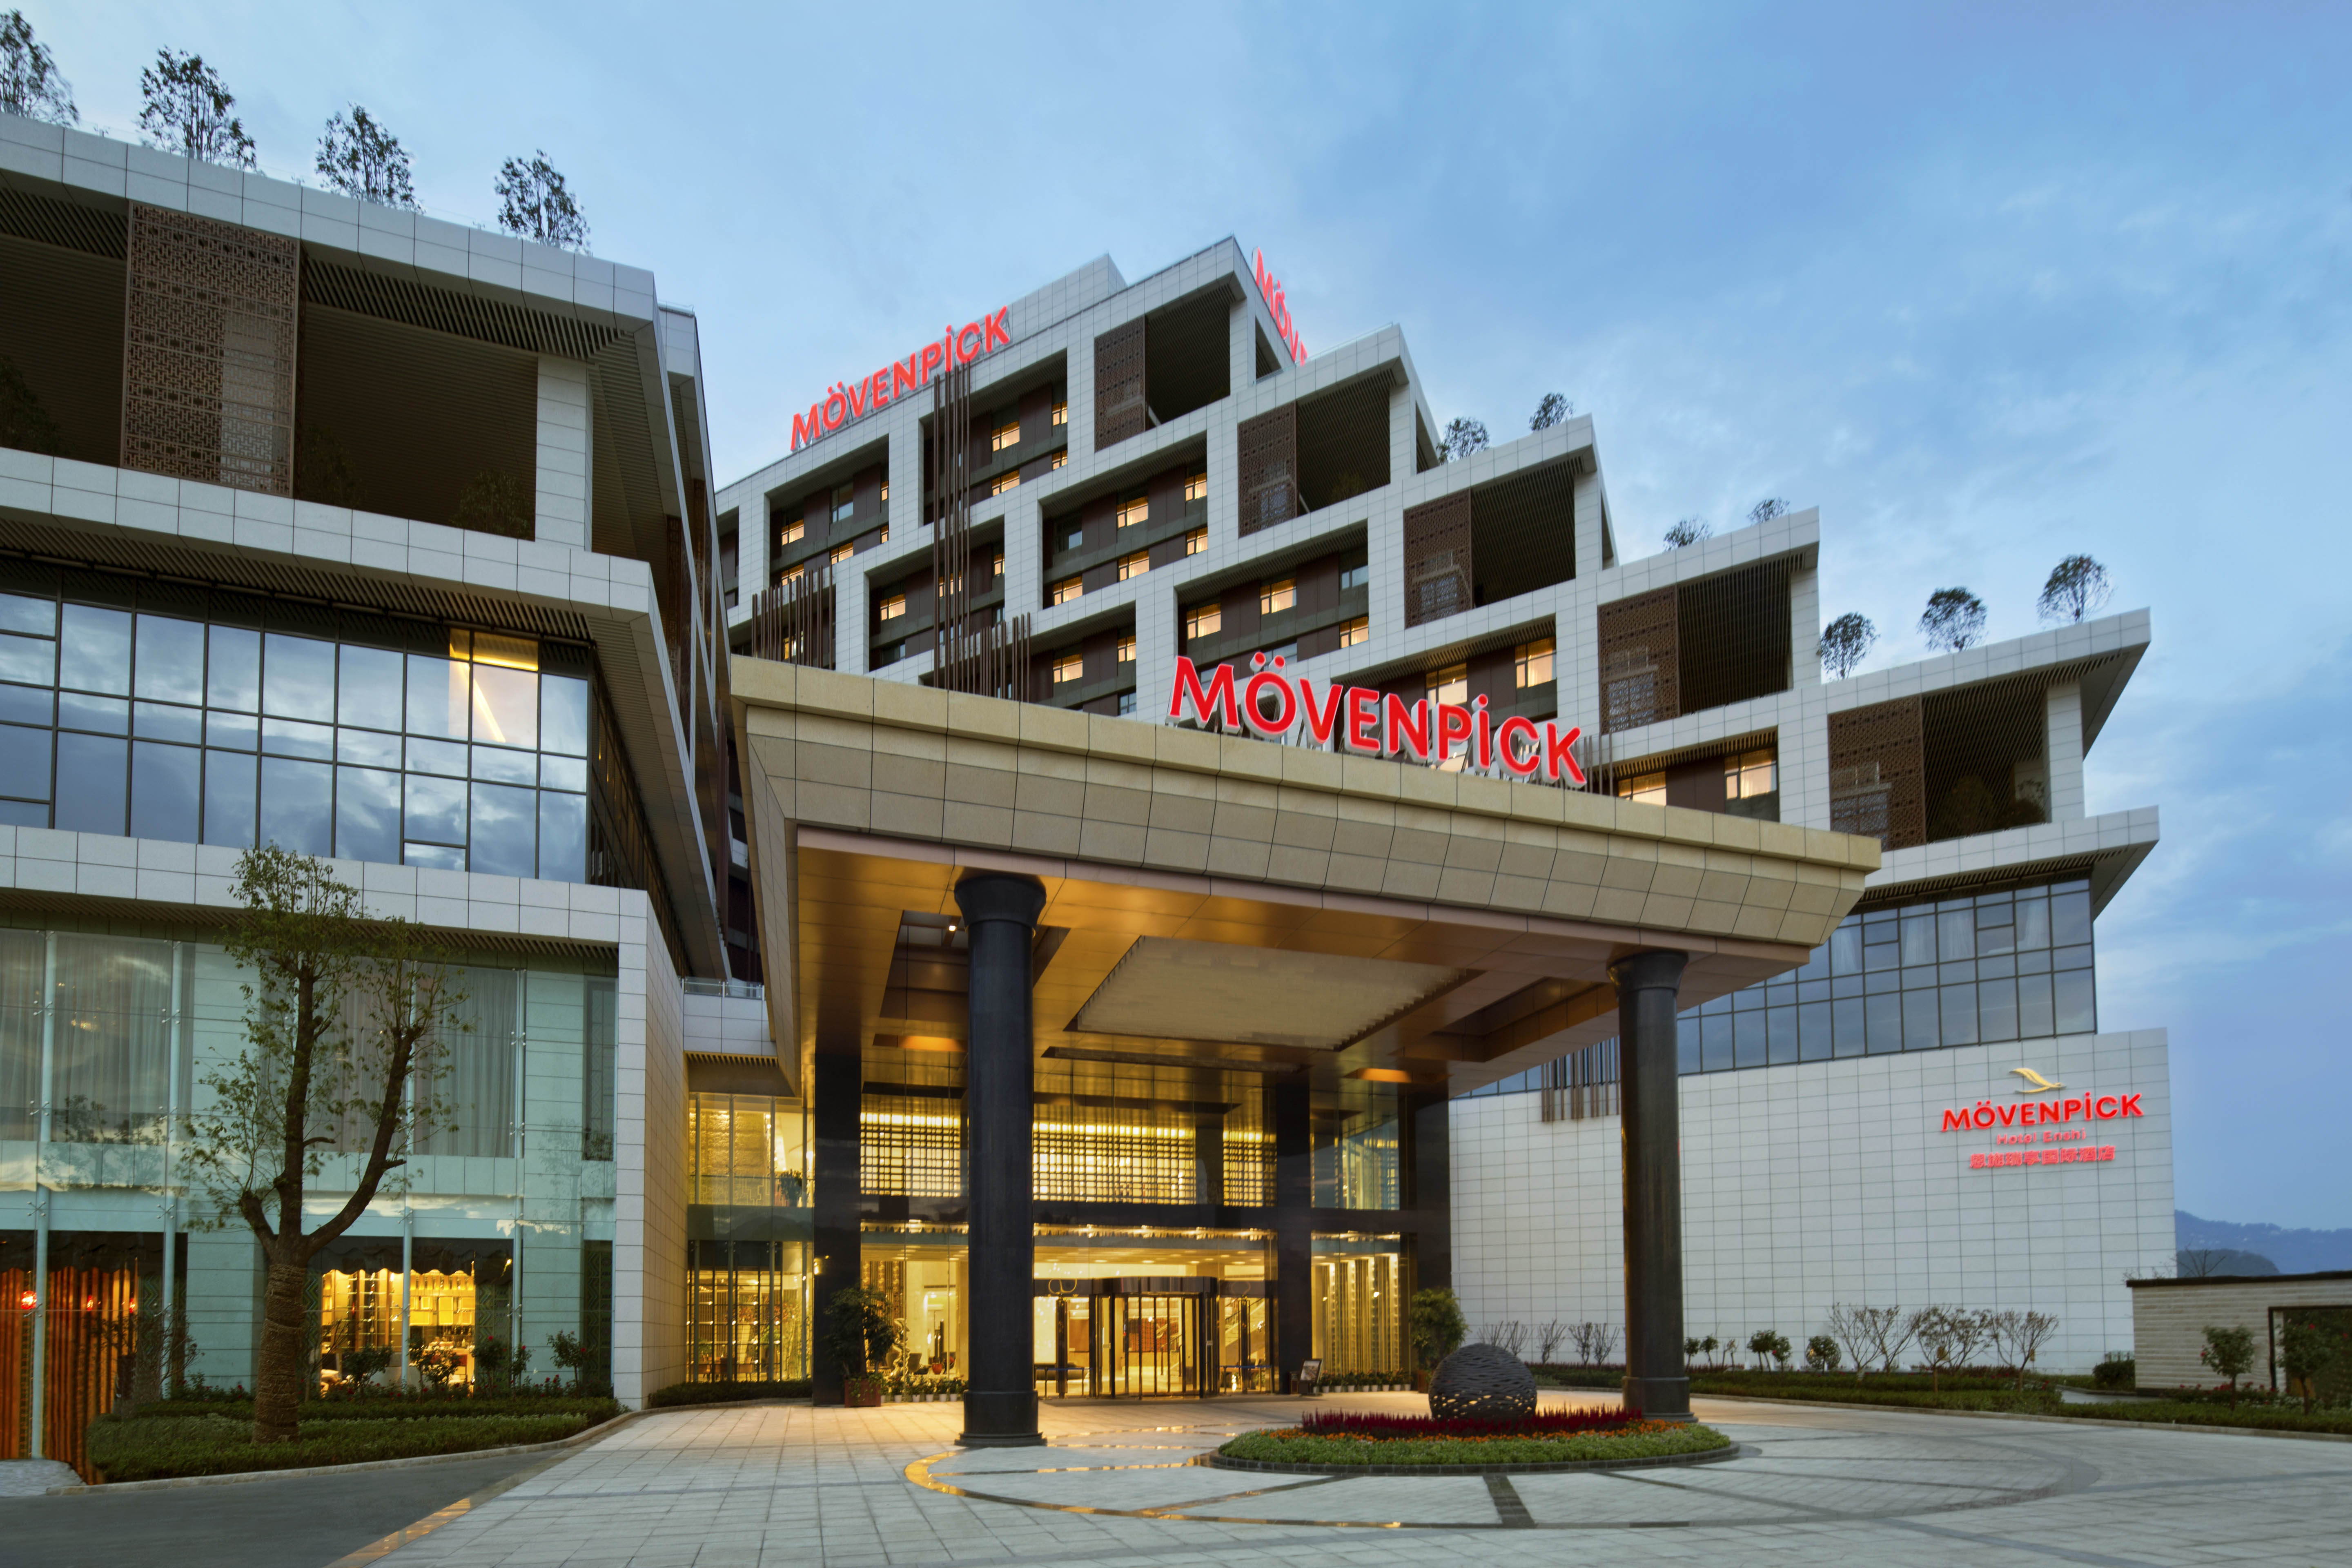 Movenpick Hotels and Resorts opens the First International Five-Star